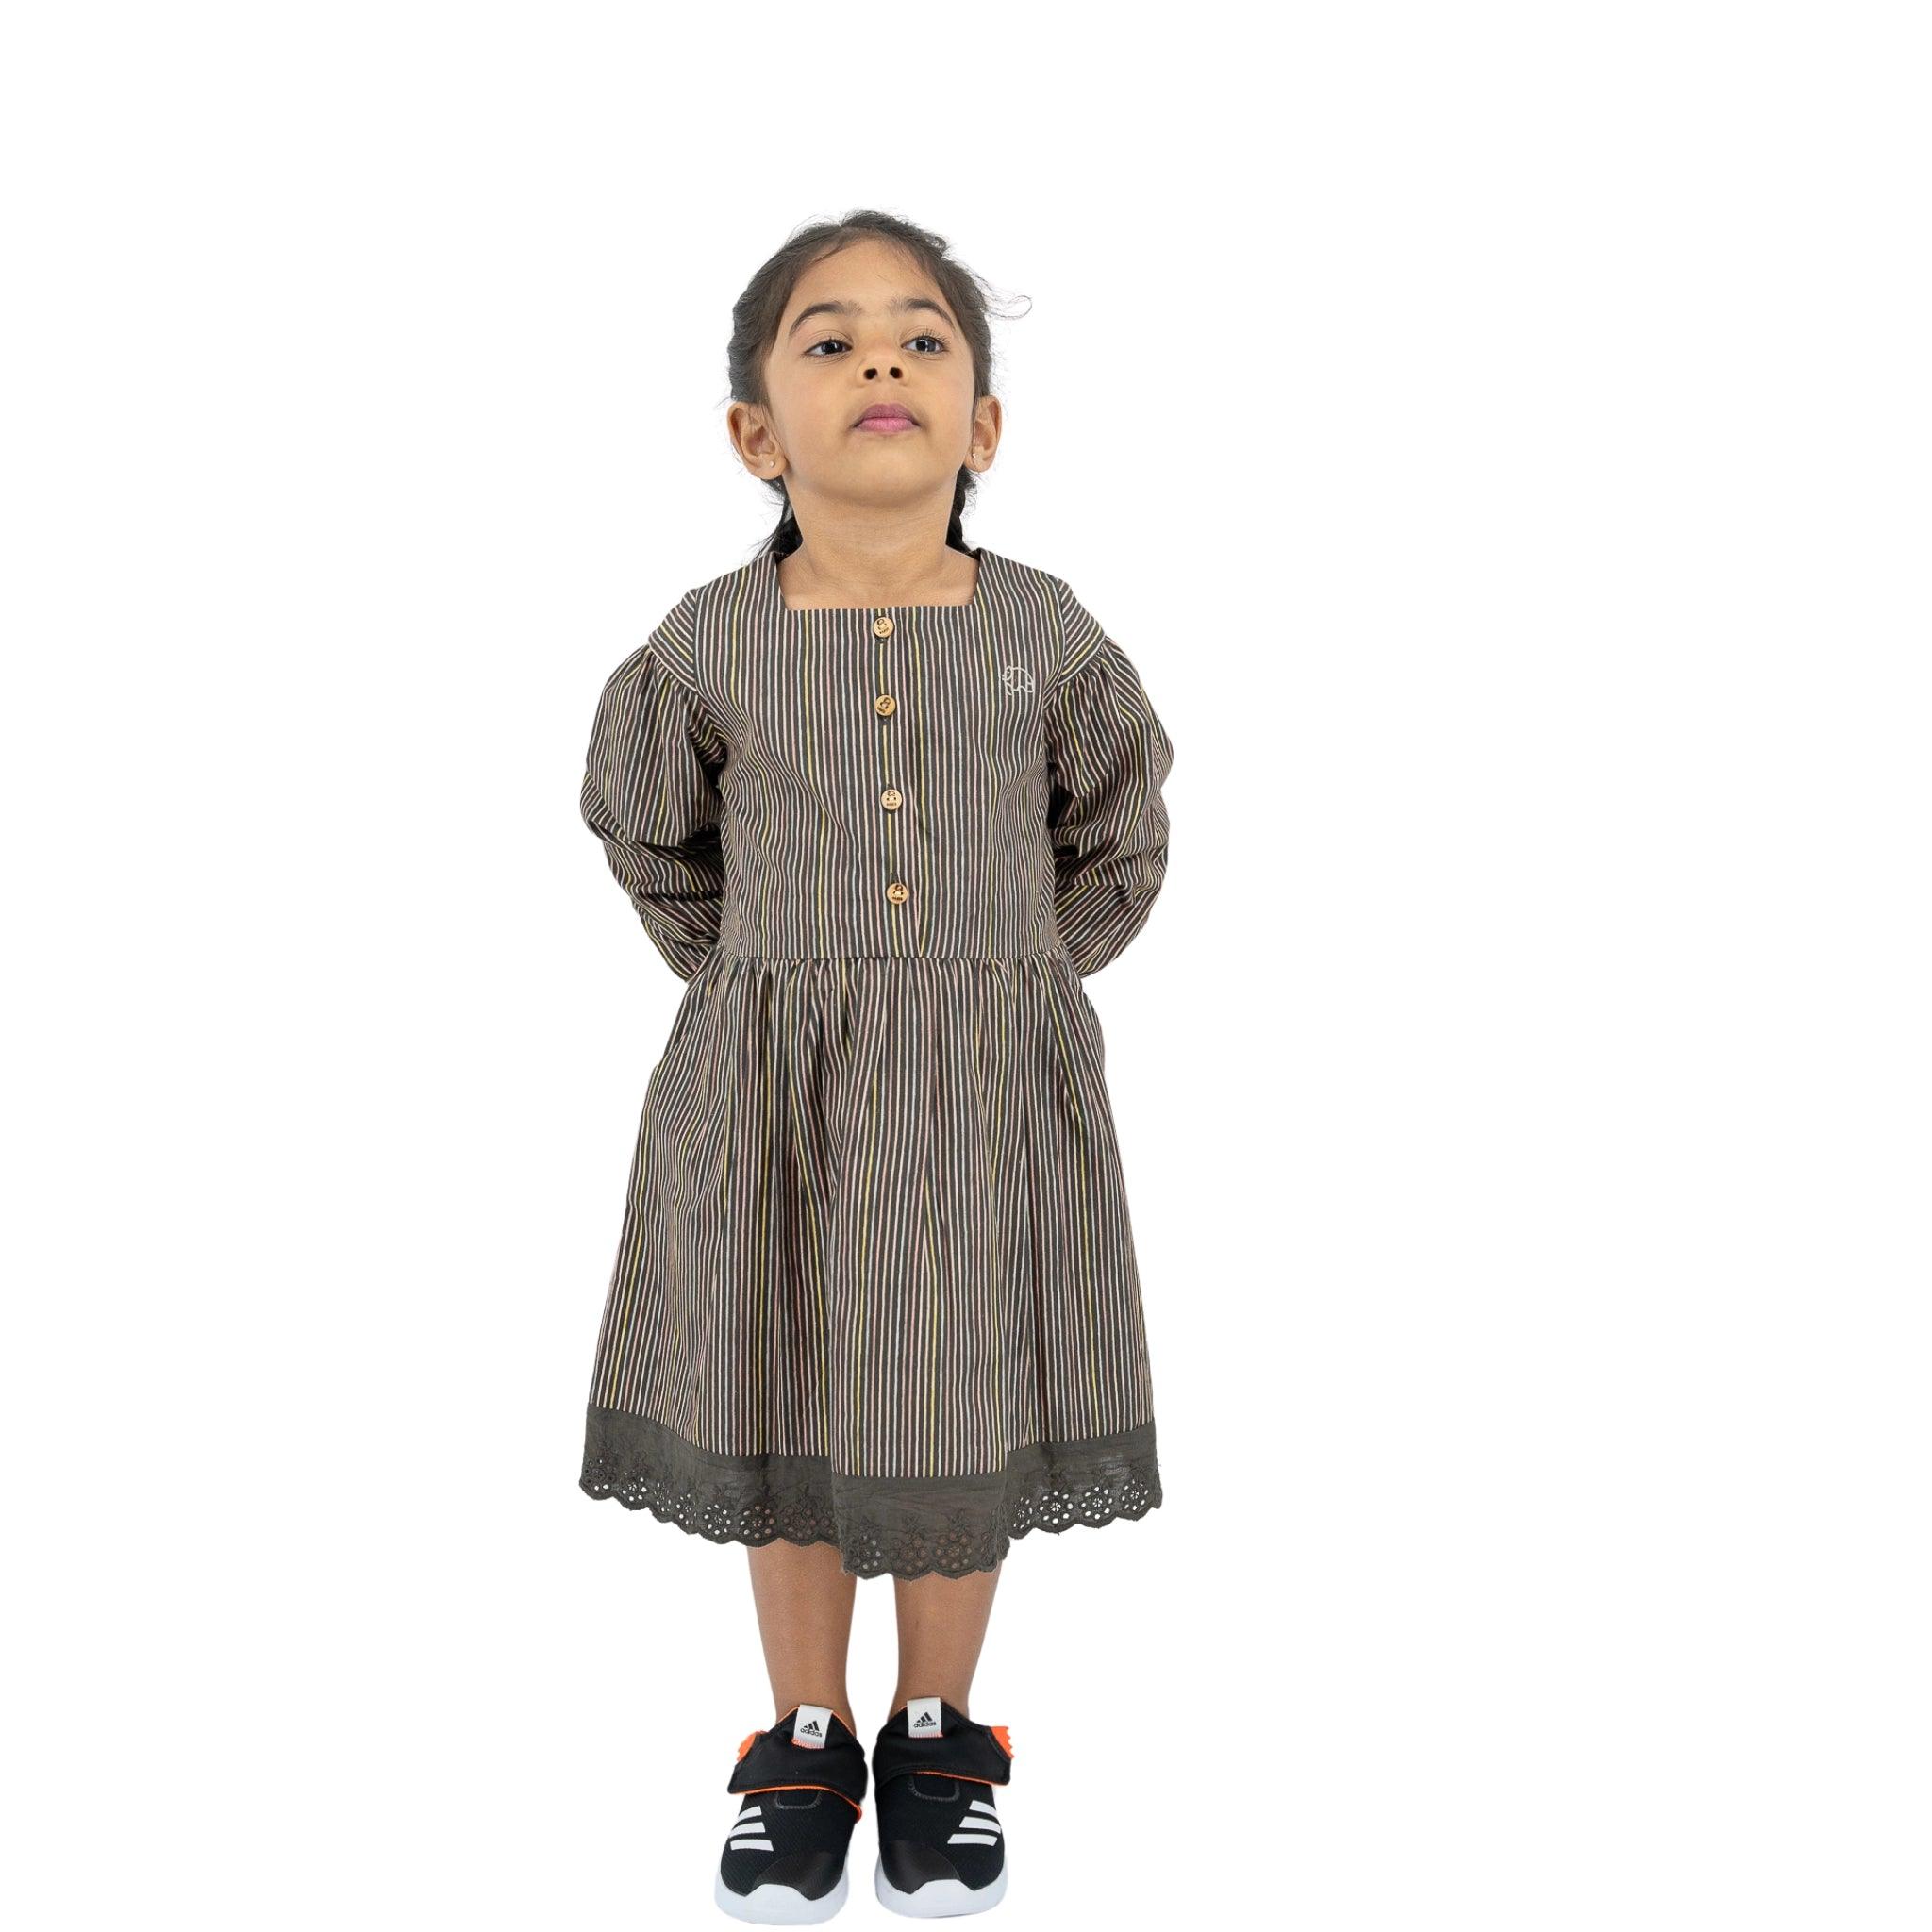 Young girl standing, looking upwards, wearing a Karee black striped full sleeve cotton dress and sneakers, isolated on a white background.